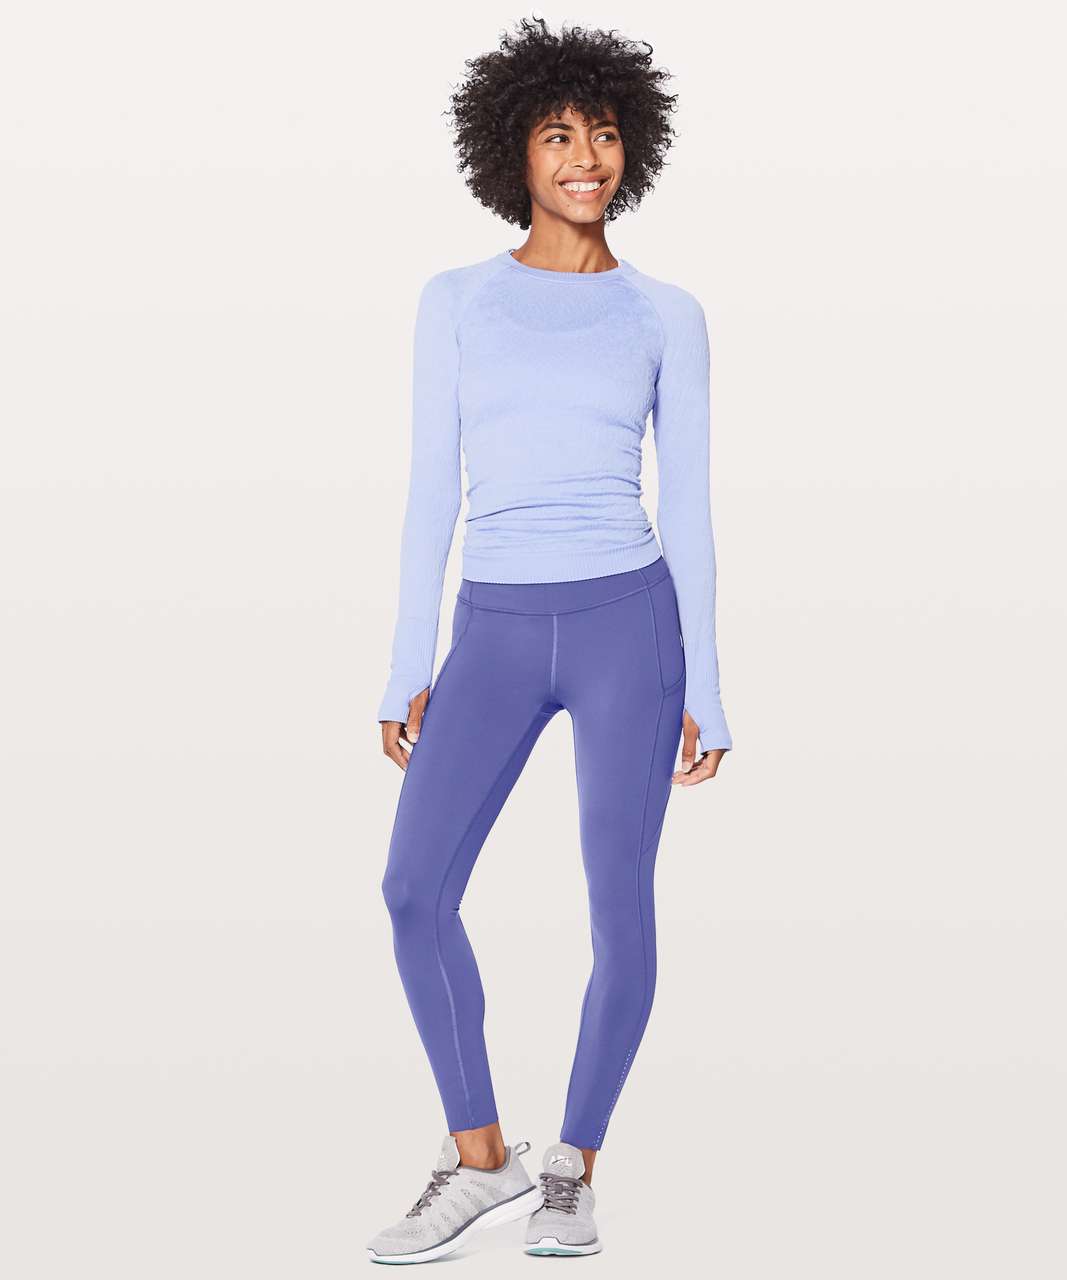 NWT! LULULEMON FAST AND FREE TIGHT 25 *NULUX City Grit White Blue